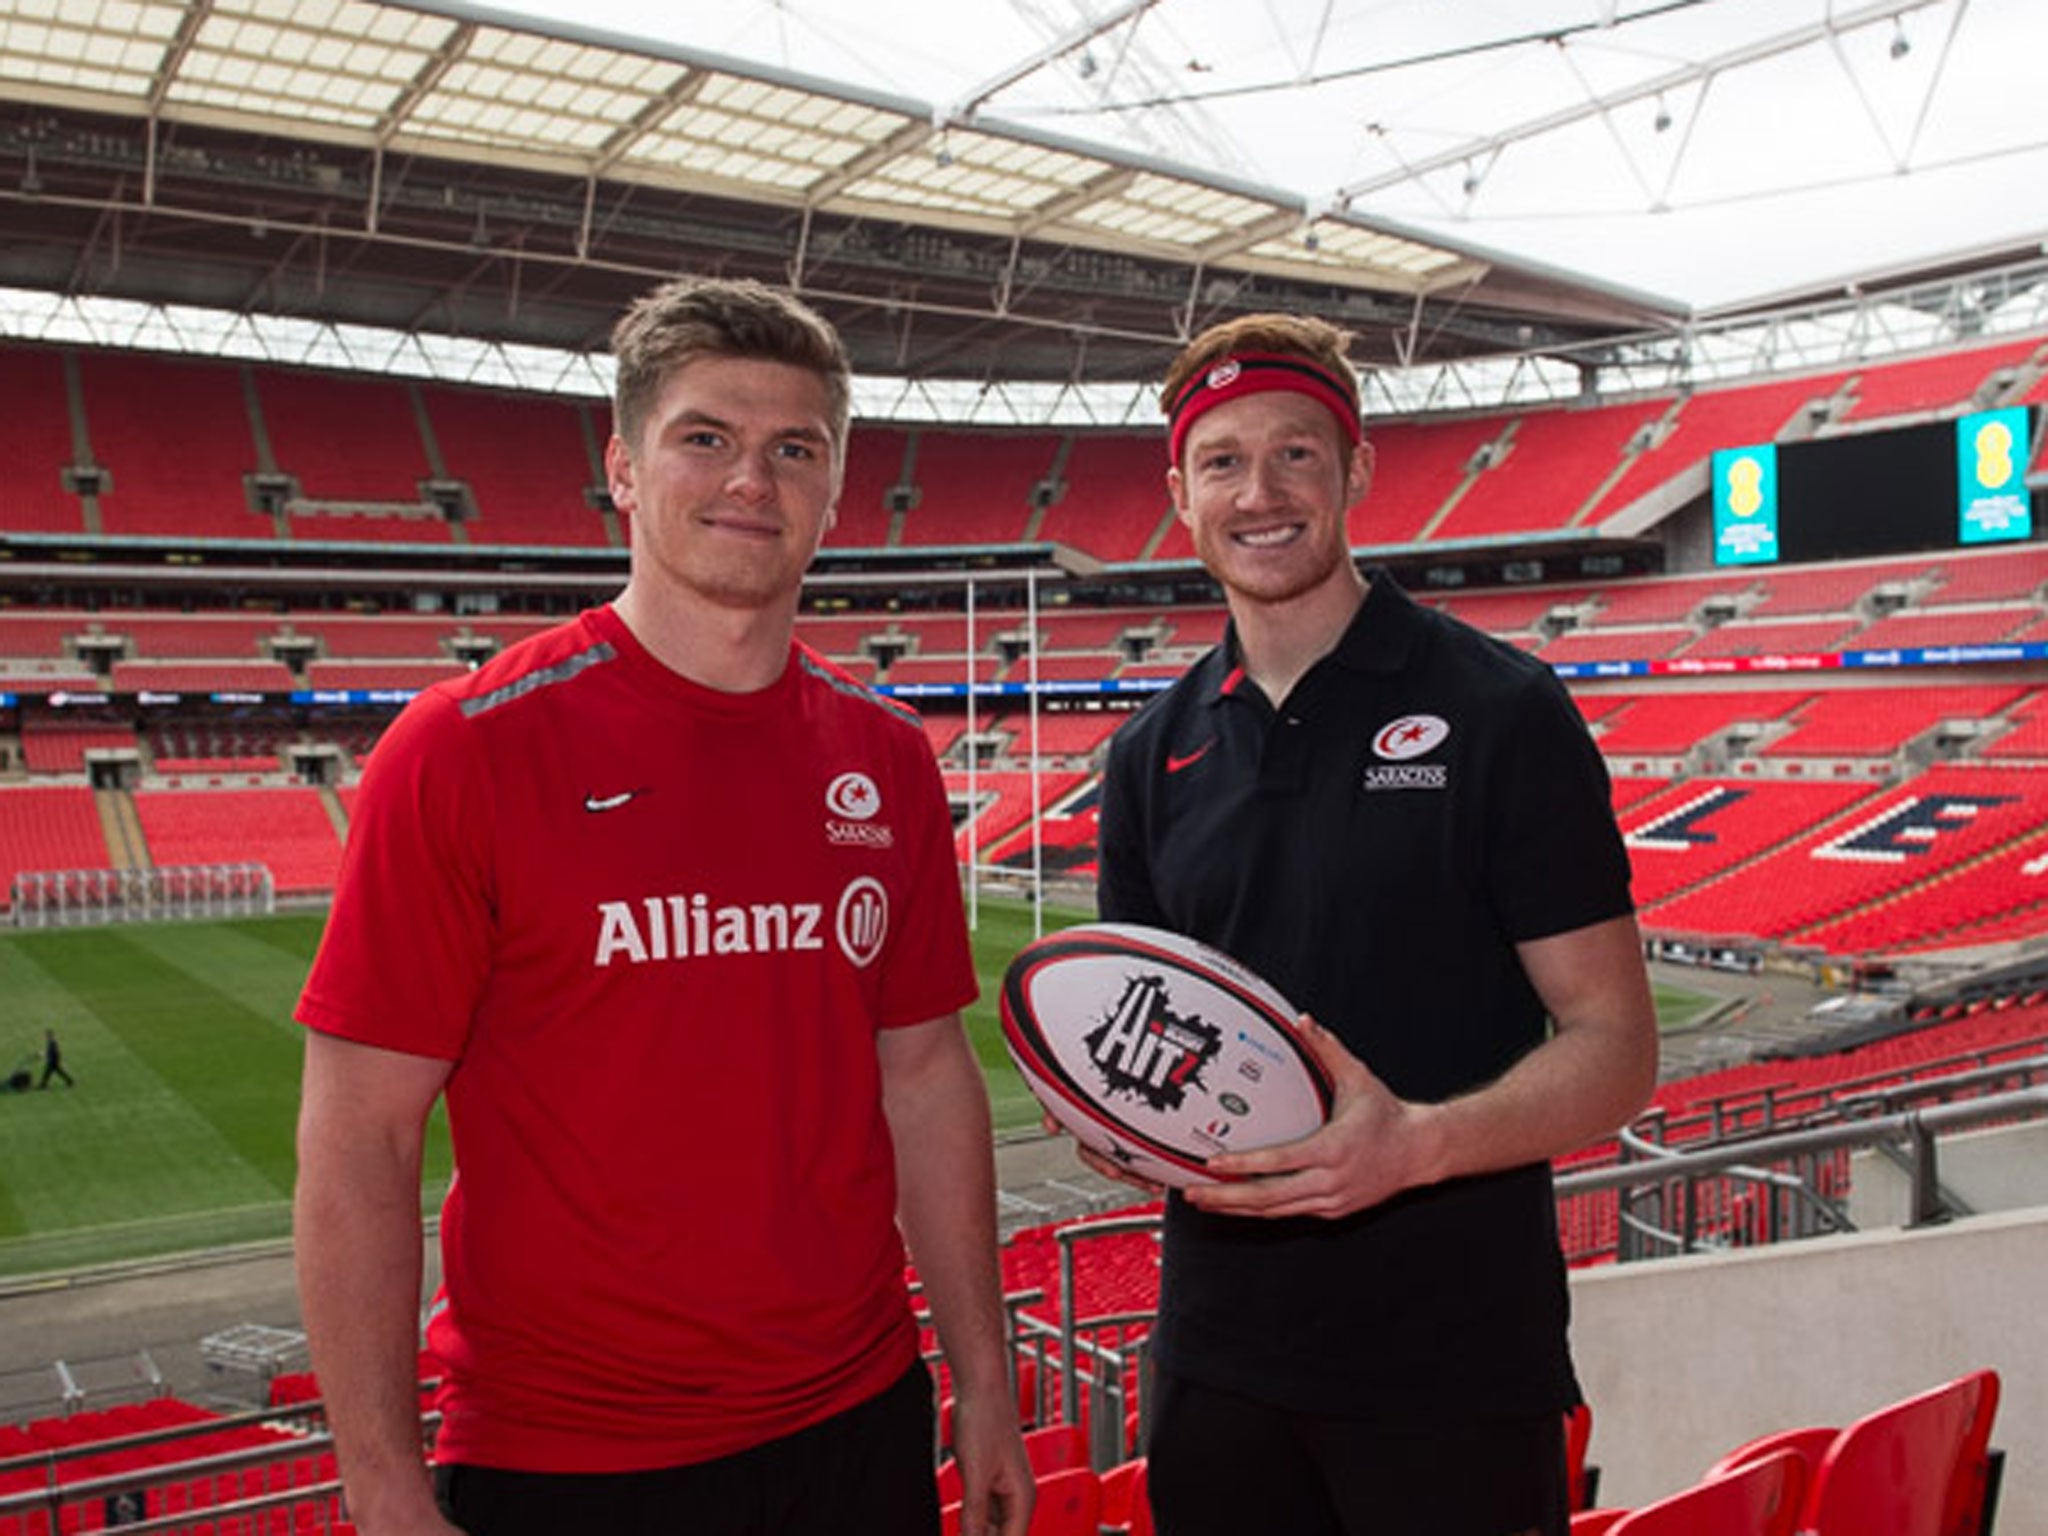 Greg Rutherford (right) takes on the Catch-a-Million challenge for Sport Relief at half time during Saracens v Harlequins at Wembley on March 22nd. The match kicks off at 3pm and is exclusively live on BT Sport